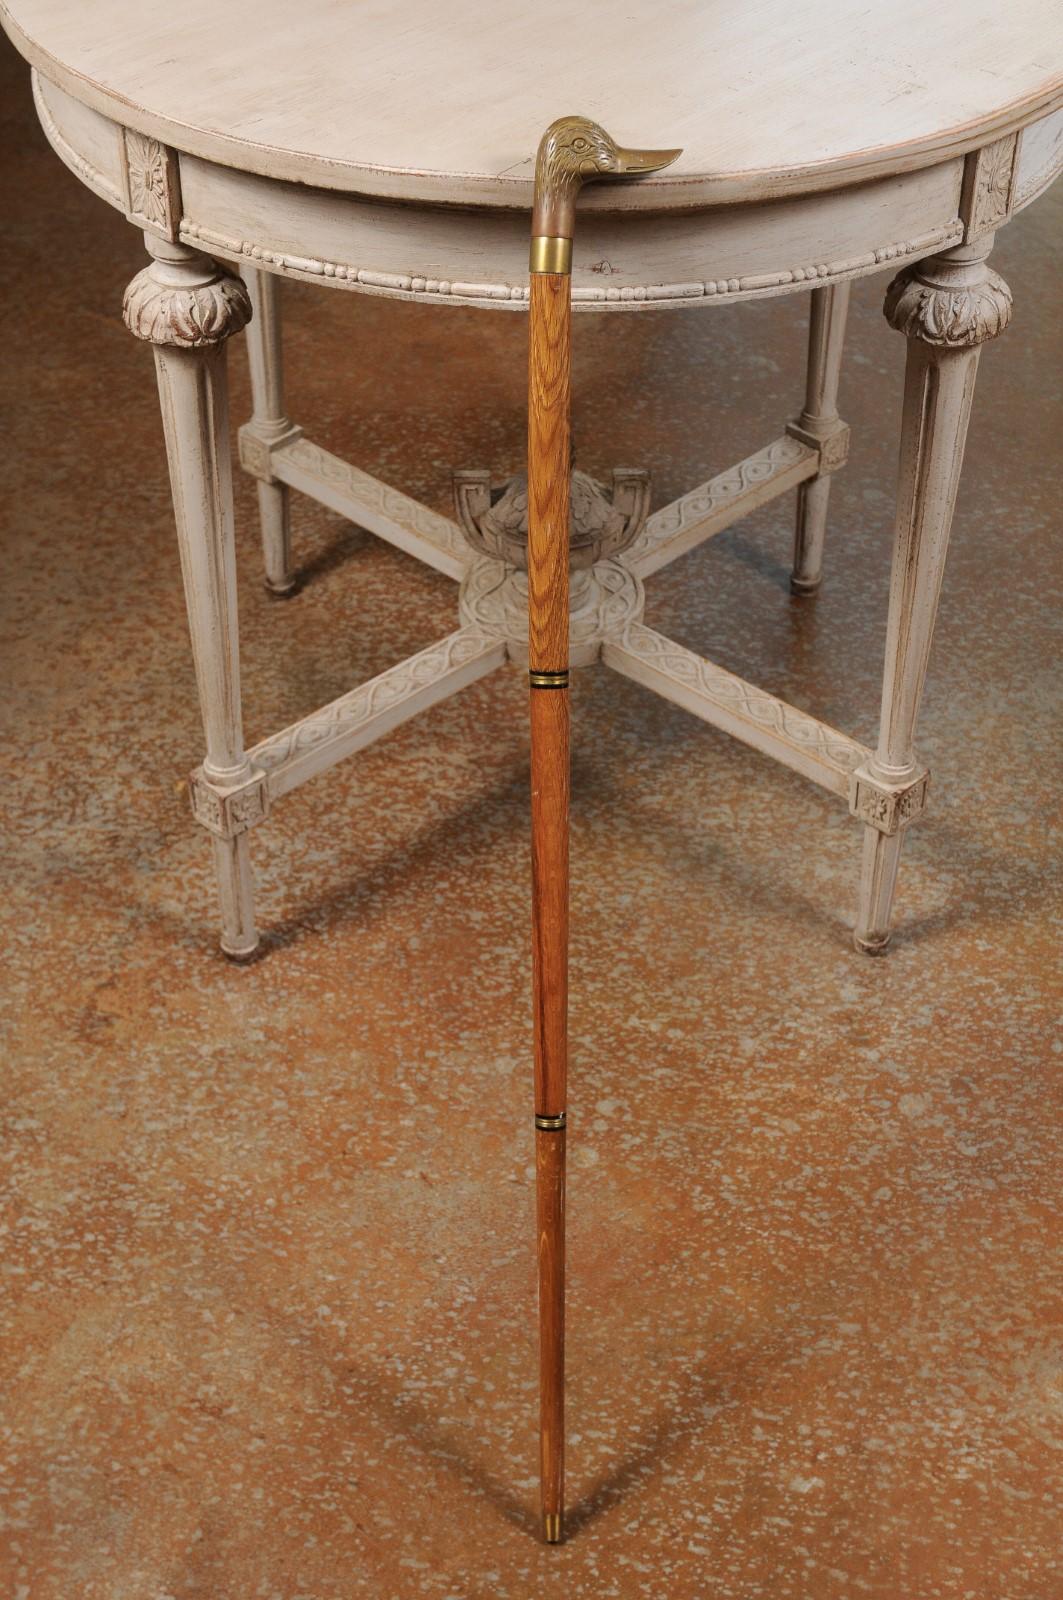 An English wooden walking cane from the 20th century, with brass duck head handle and ebonized accents. Born in England during the 20th century, this elegant walking cane features a wooden body, accented with brass rings and ebonized accents,